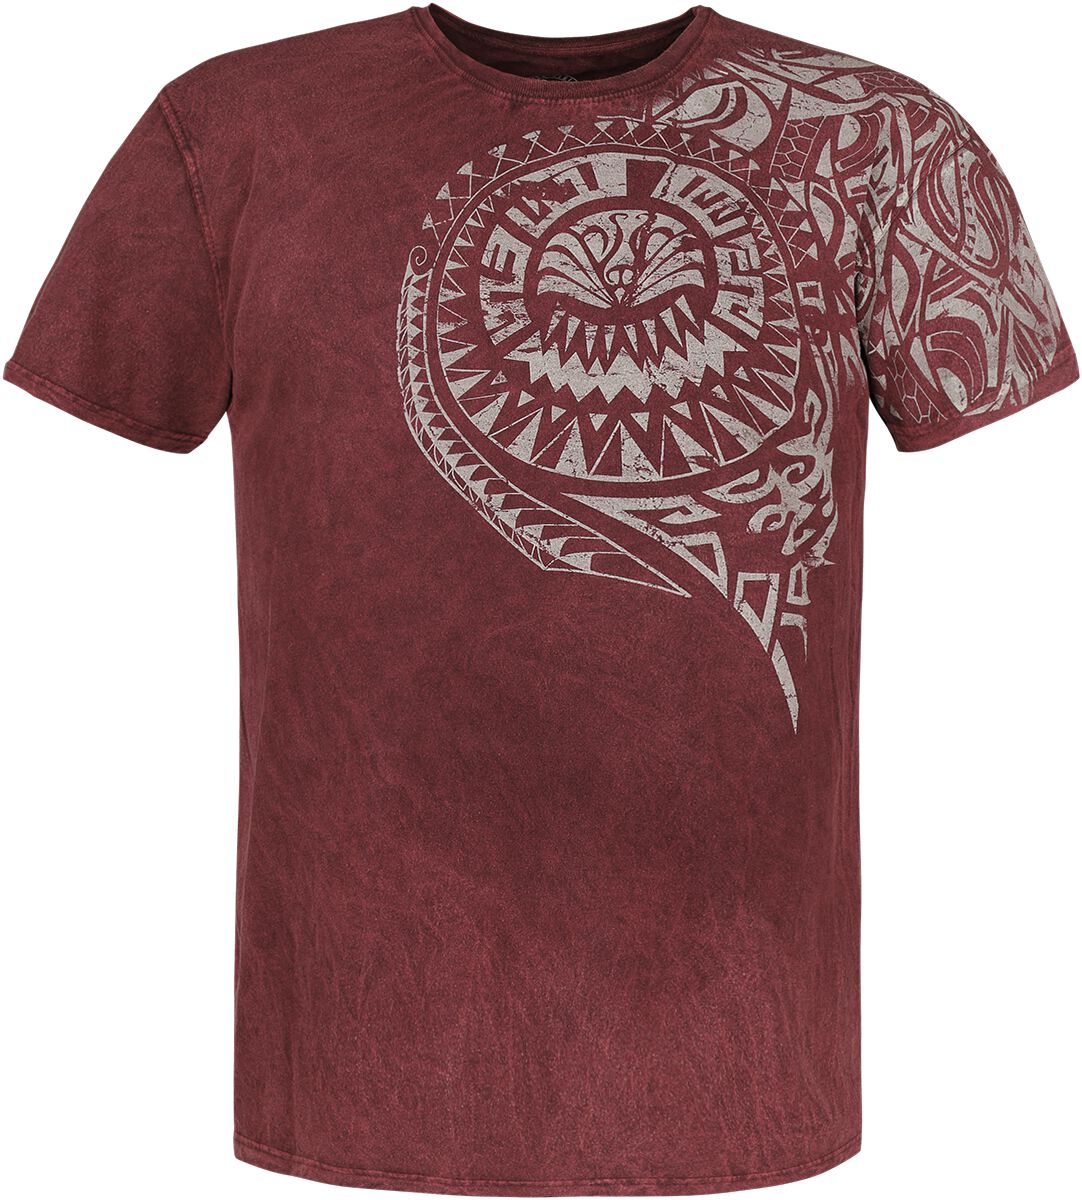 Image of T-Shirt di Outer Vision - Burned Tattoo - S a 4XL - Uomo - rosso